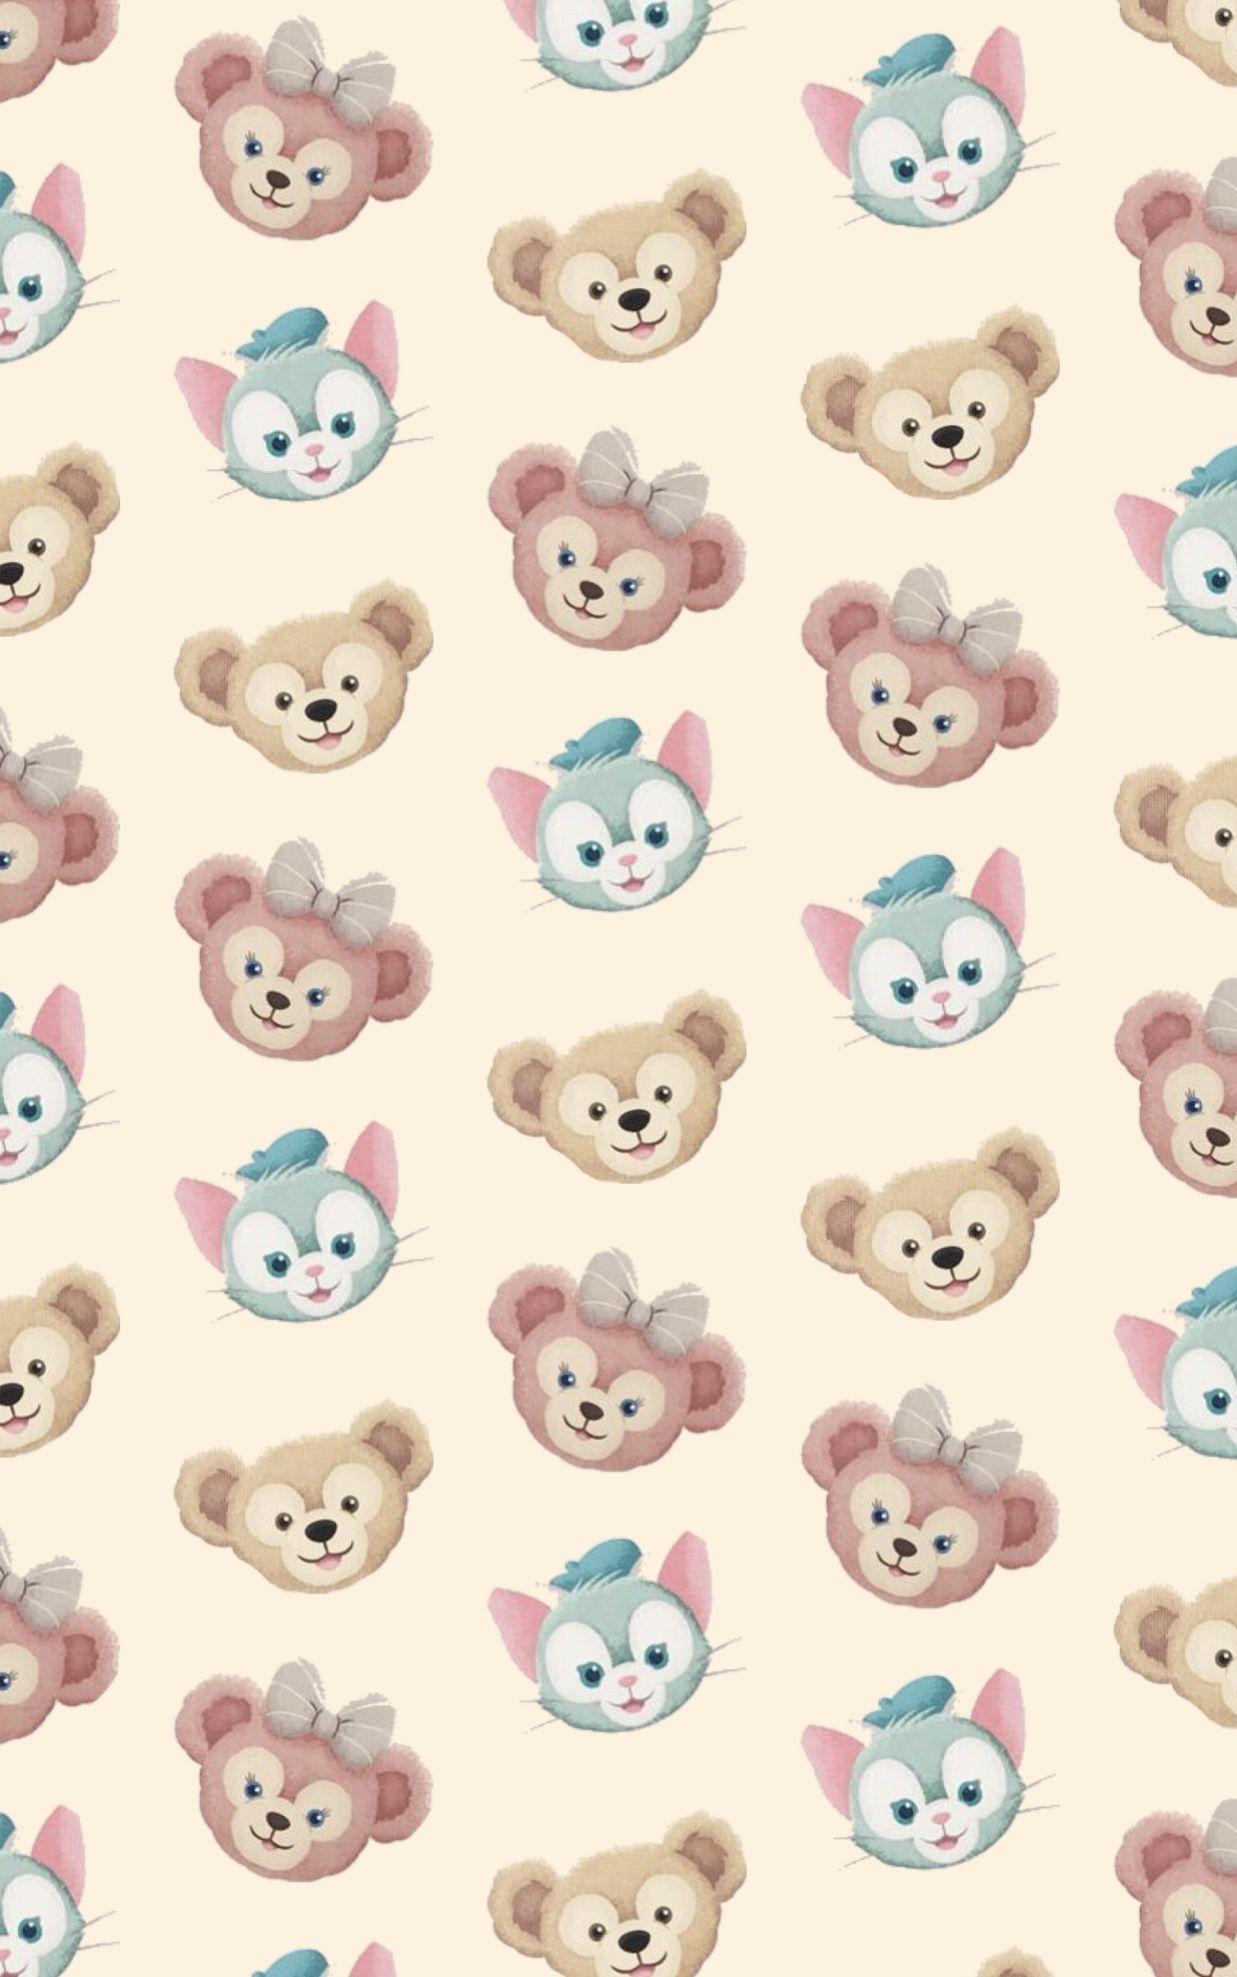 Duffy Wallpapers Top Free Duffy Backgrounds Wallpaperaccess